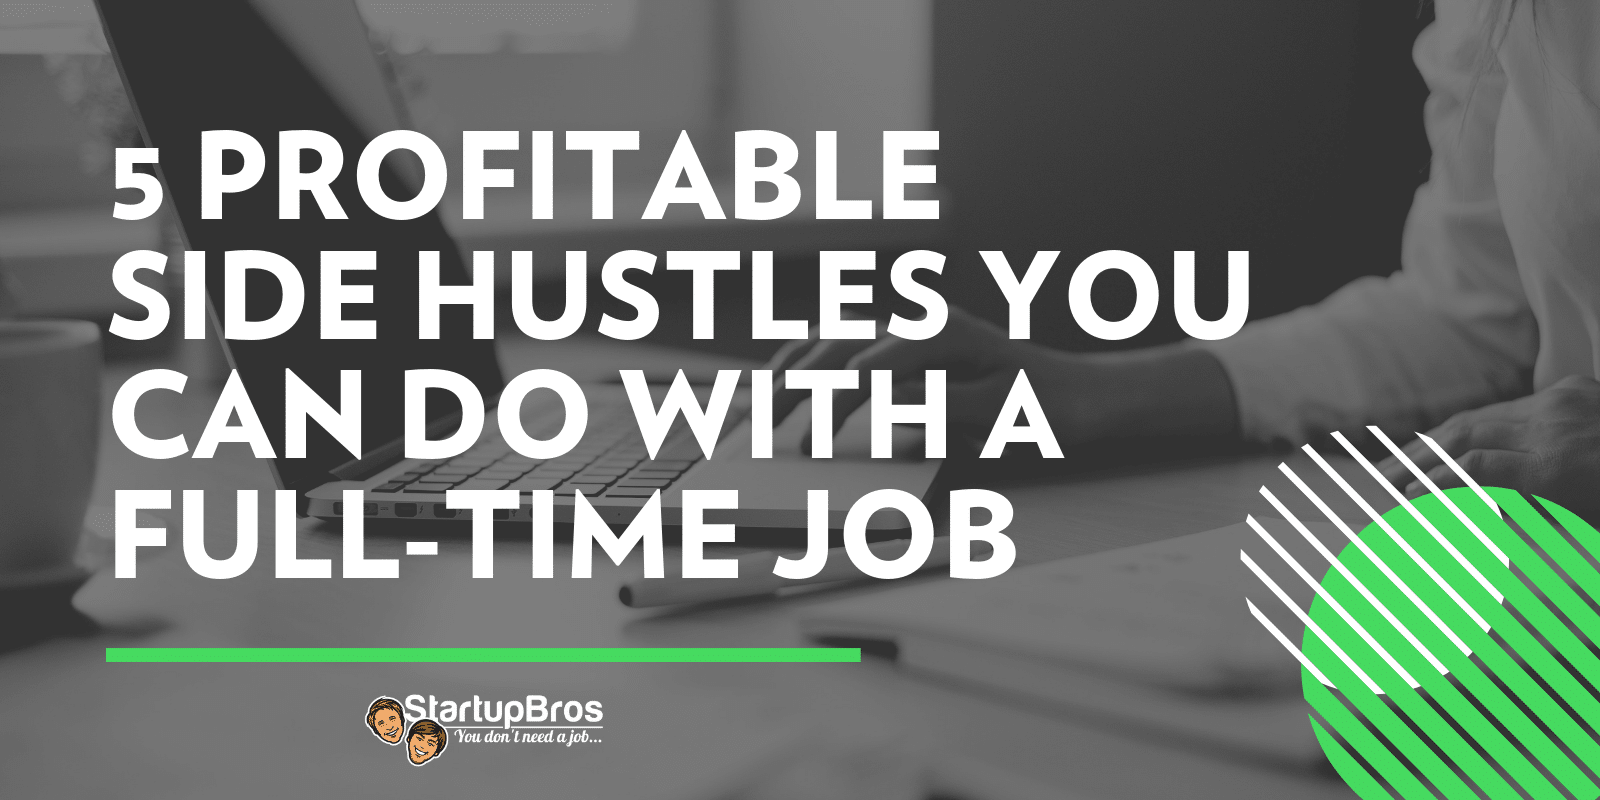 5 Profitable Side Hustles You Can Do with a Full-Time Job